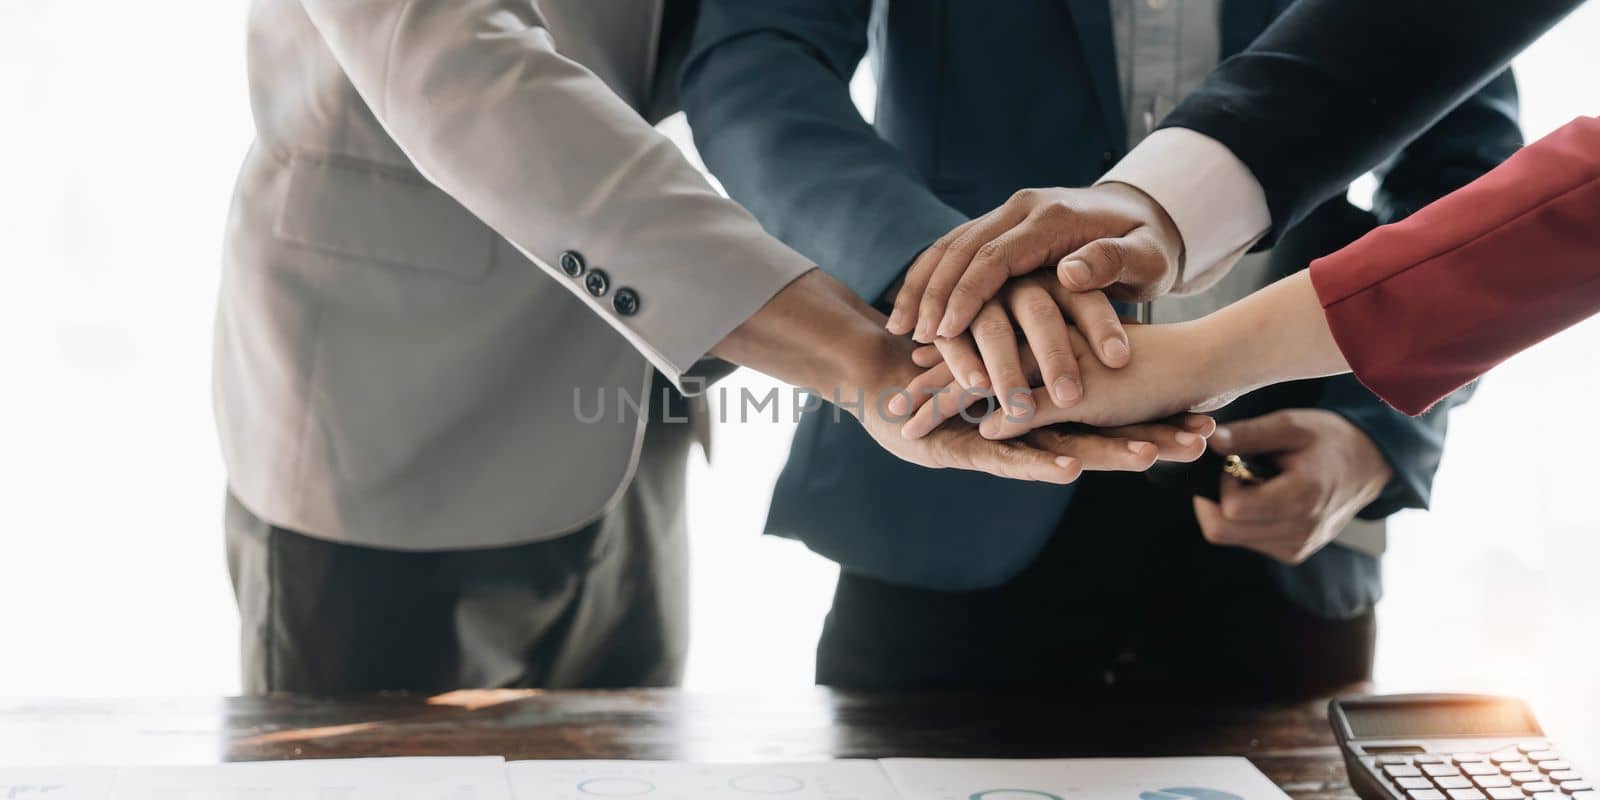 Group of business people putting their hands working together on wooden background in office. group support teamwork agreement concept